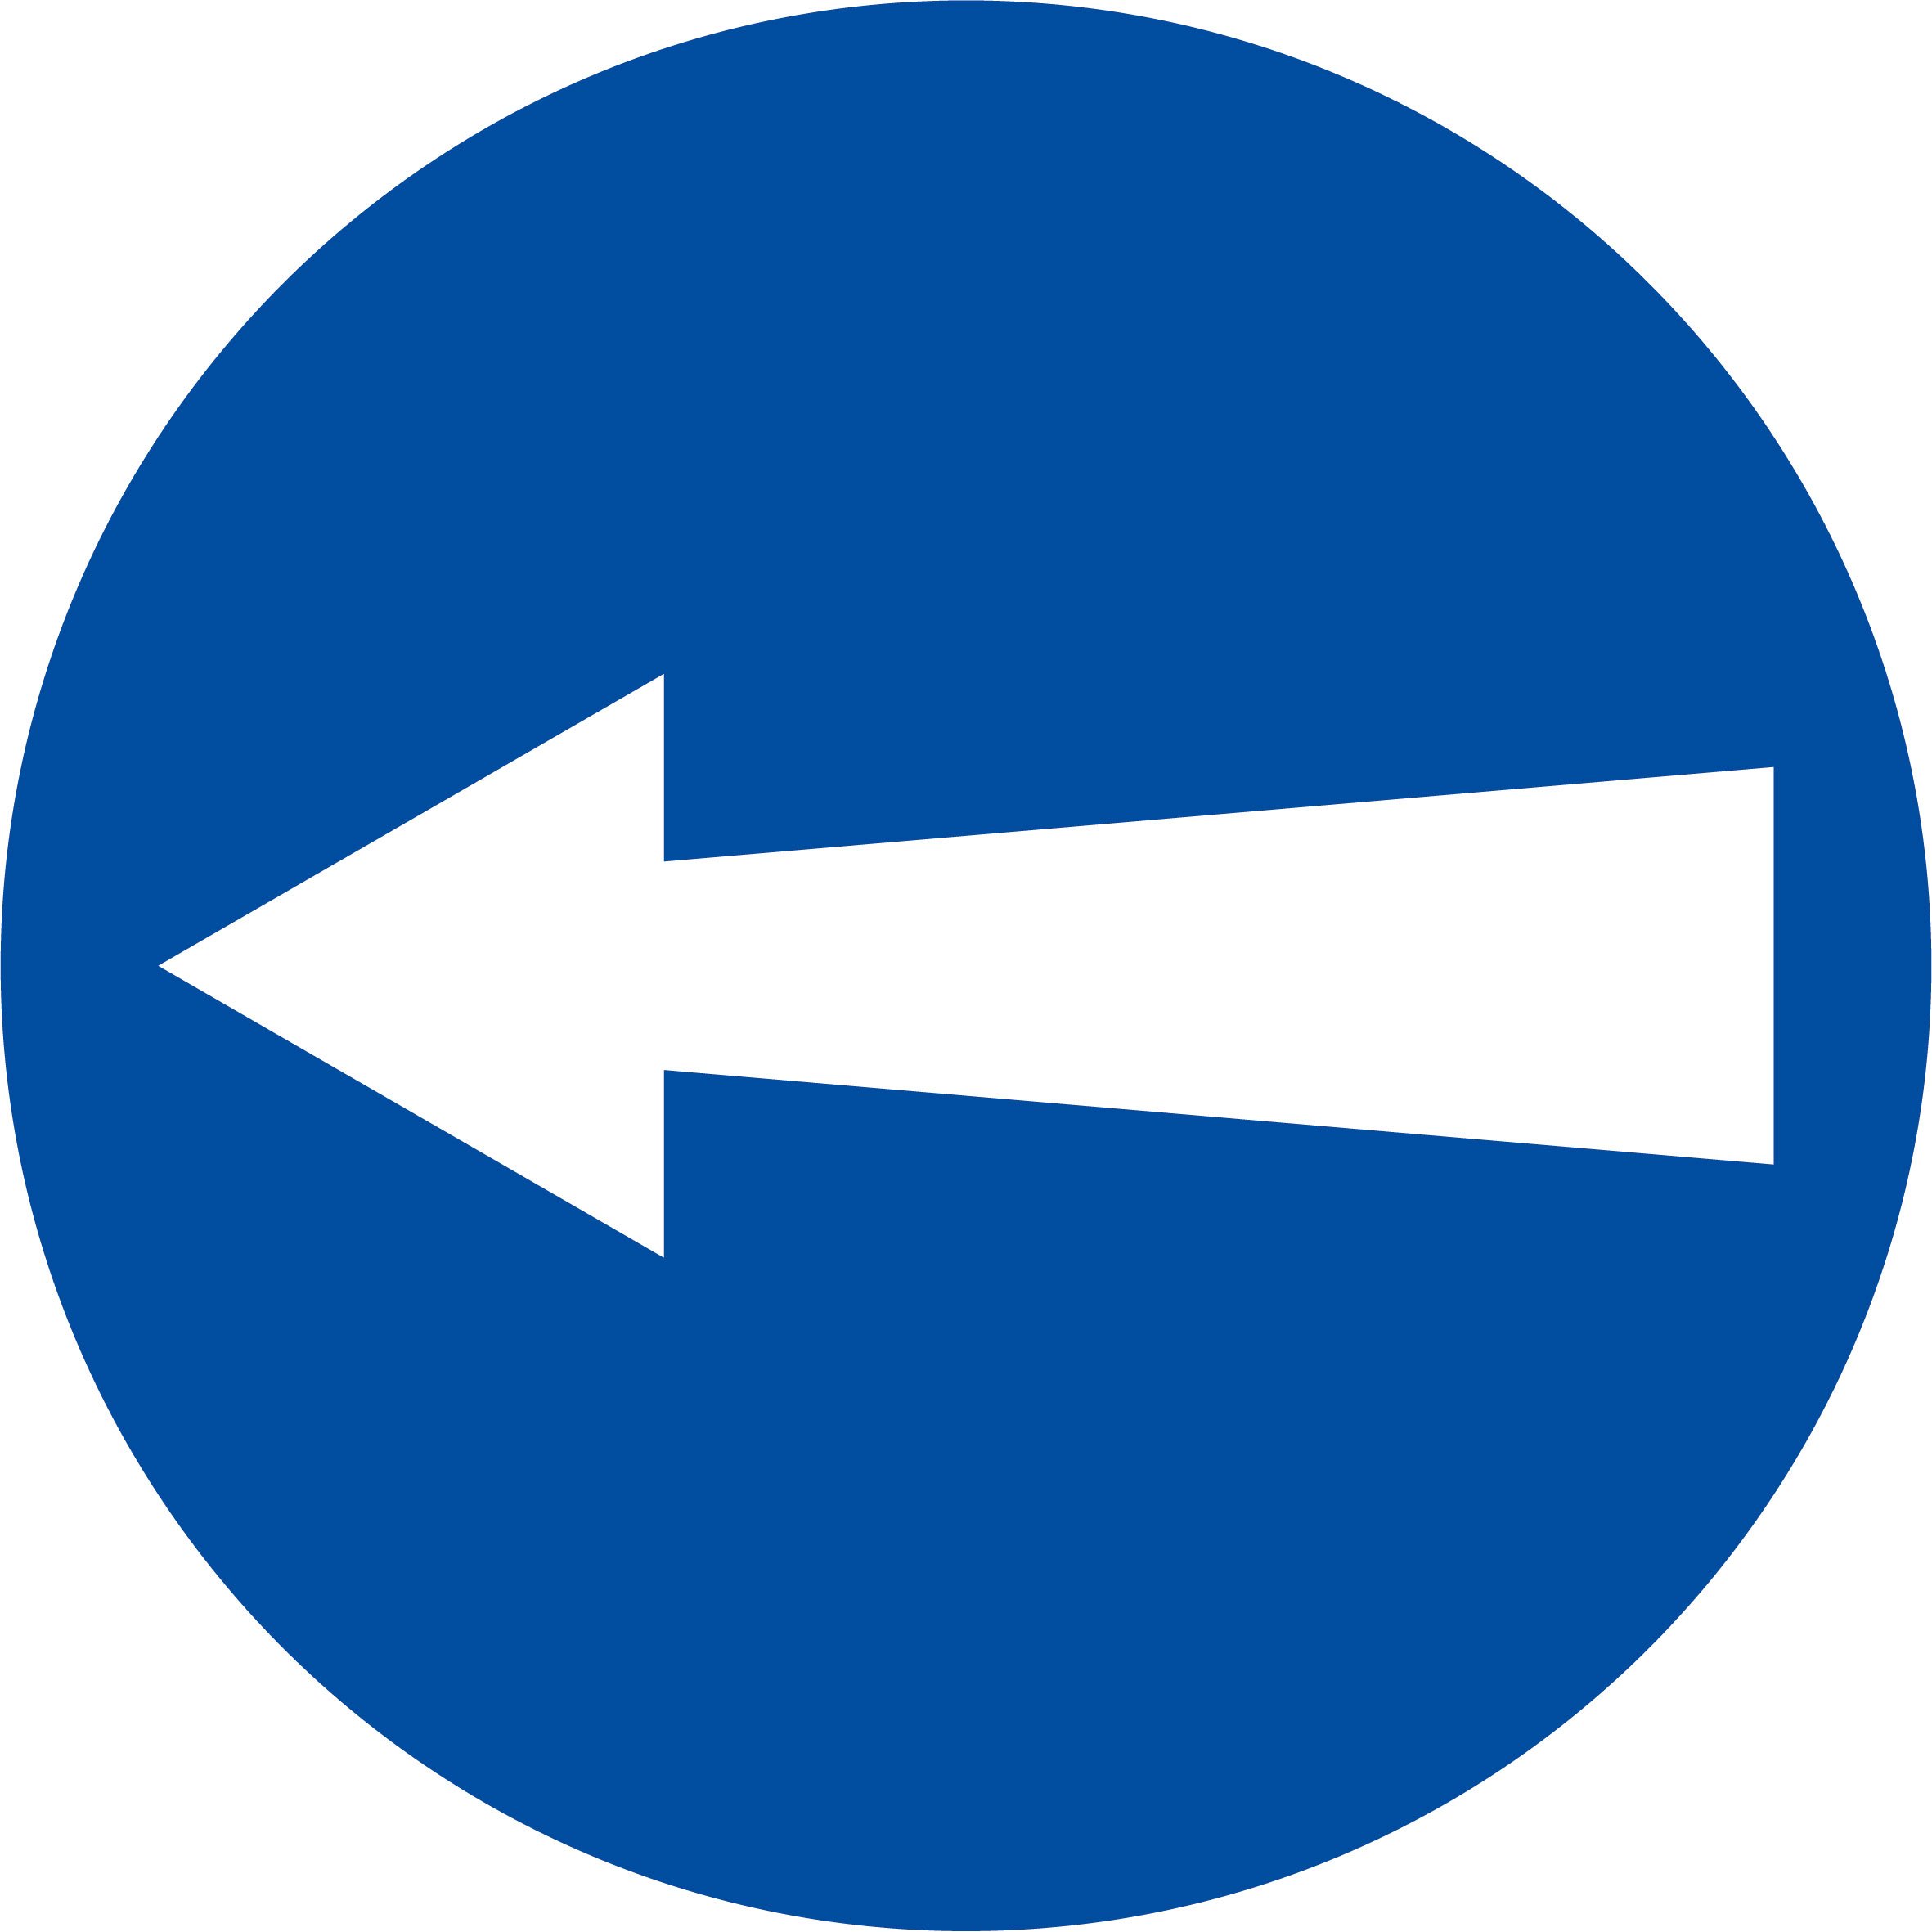 Road Traffic Signs And Symbols | Picturenew